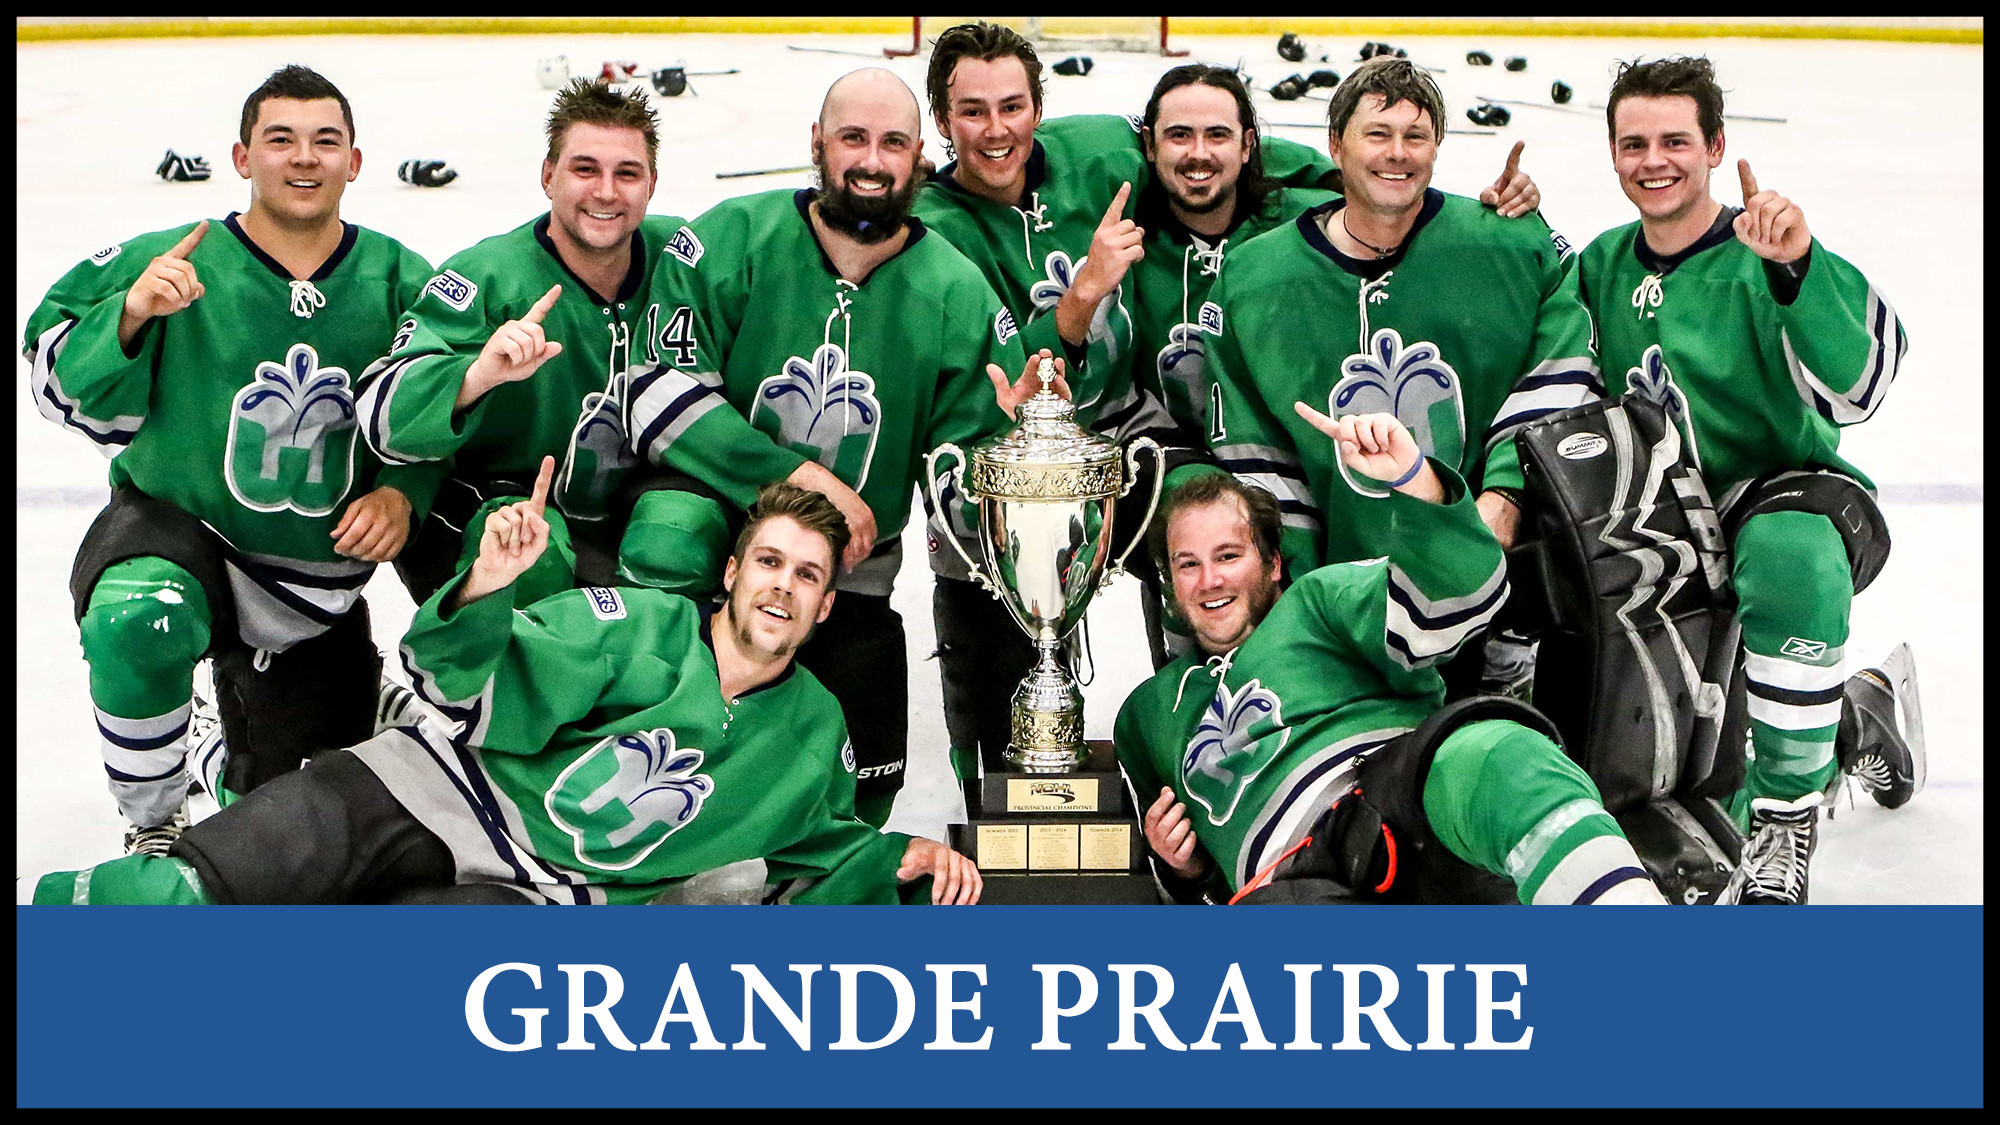 Hockey in Grande Prairie, League team and player registration, stats, schedules. For men and women to play hockey in a fun and safe environment.